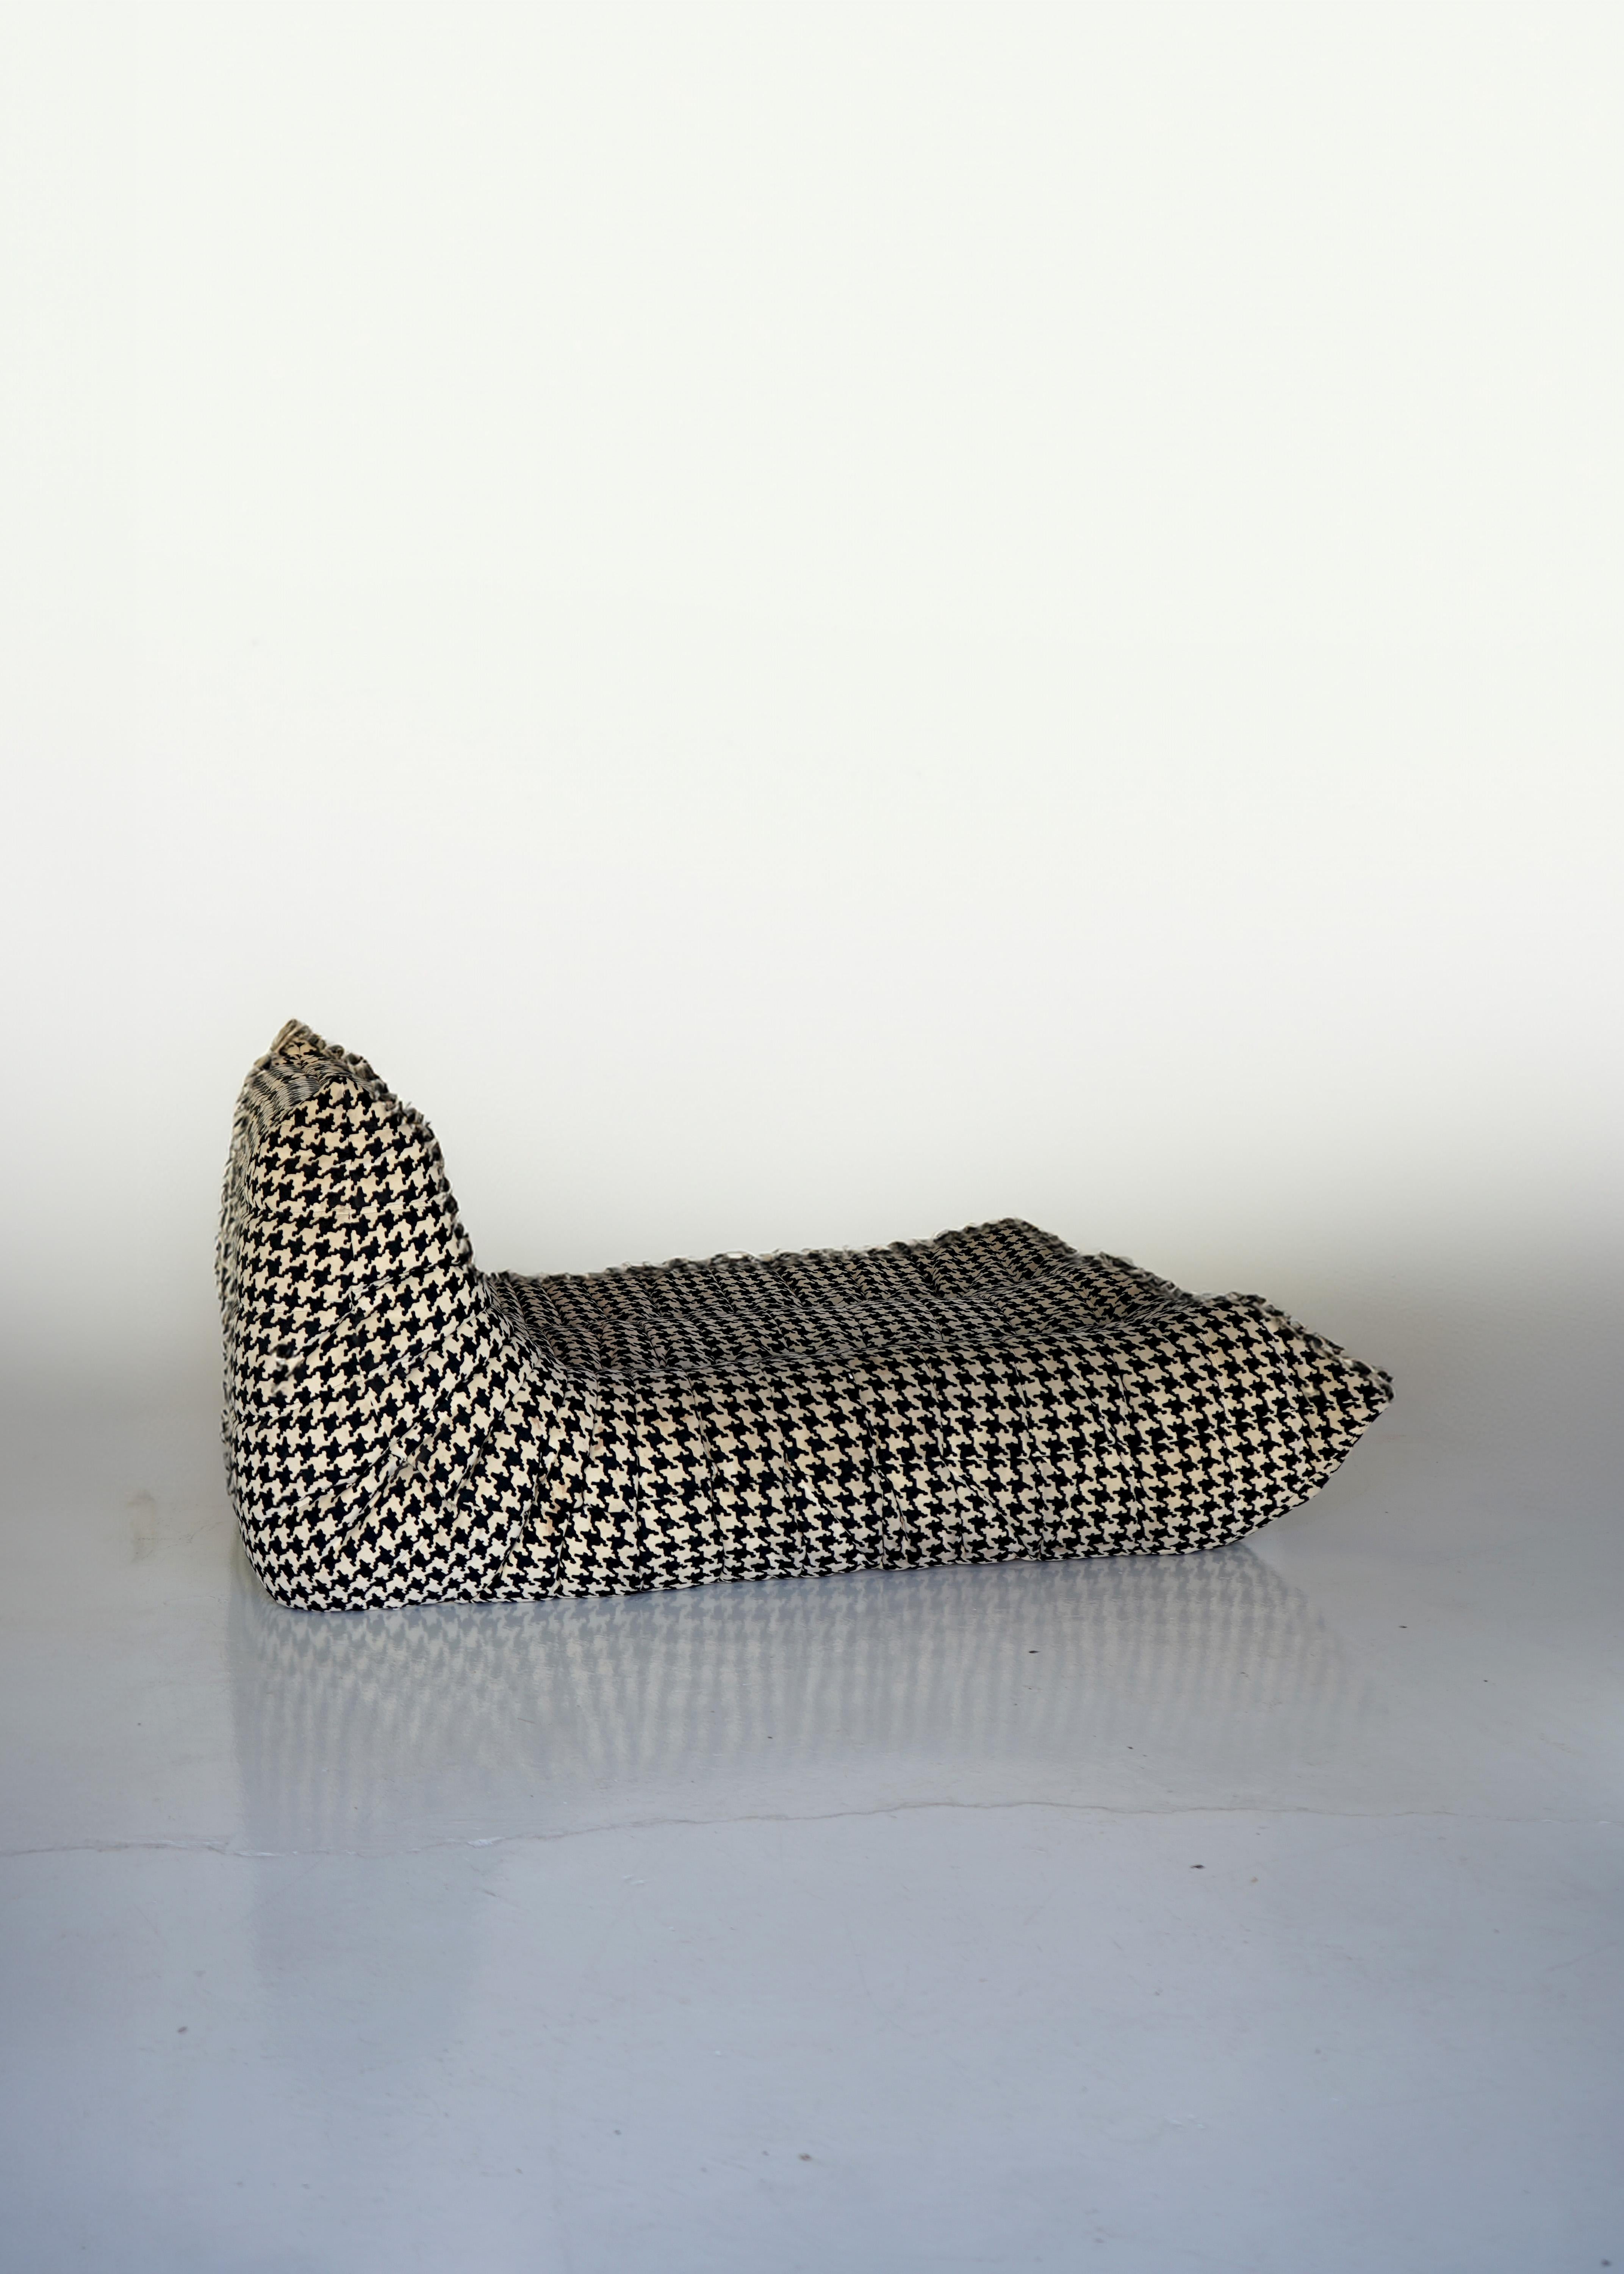 Special 50th Anniversary Togo chaise by Ligne Roset in limited edition houndstooth Alcantara. Exceedingly rare model/fabric in very good condition. 

Message for shipping quote.